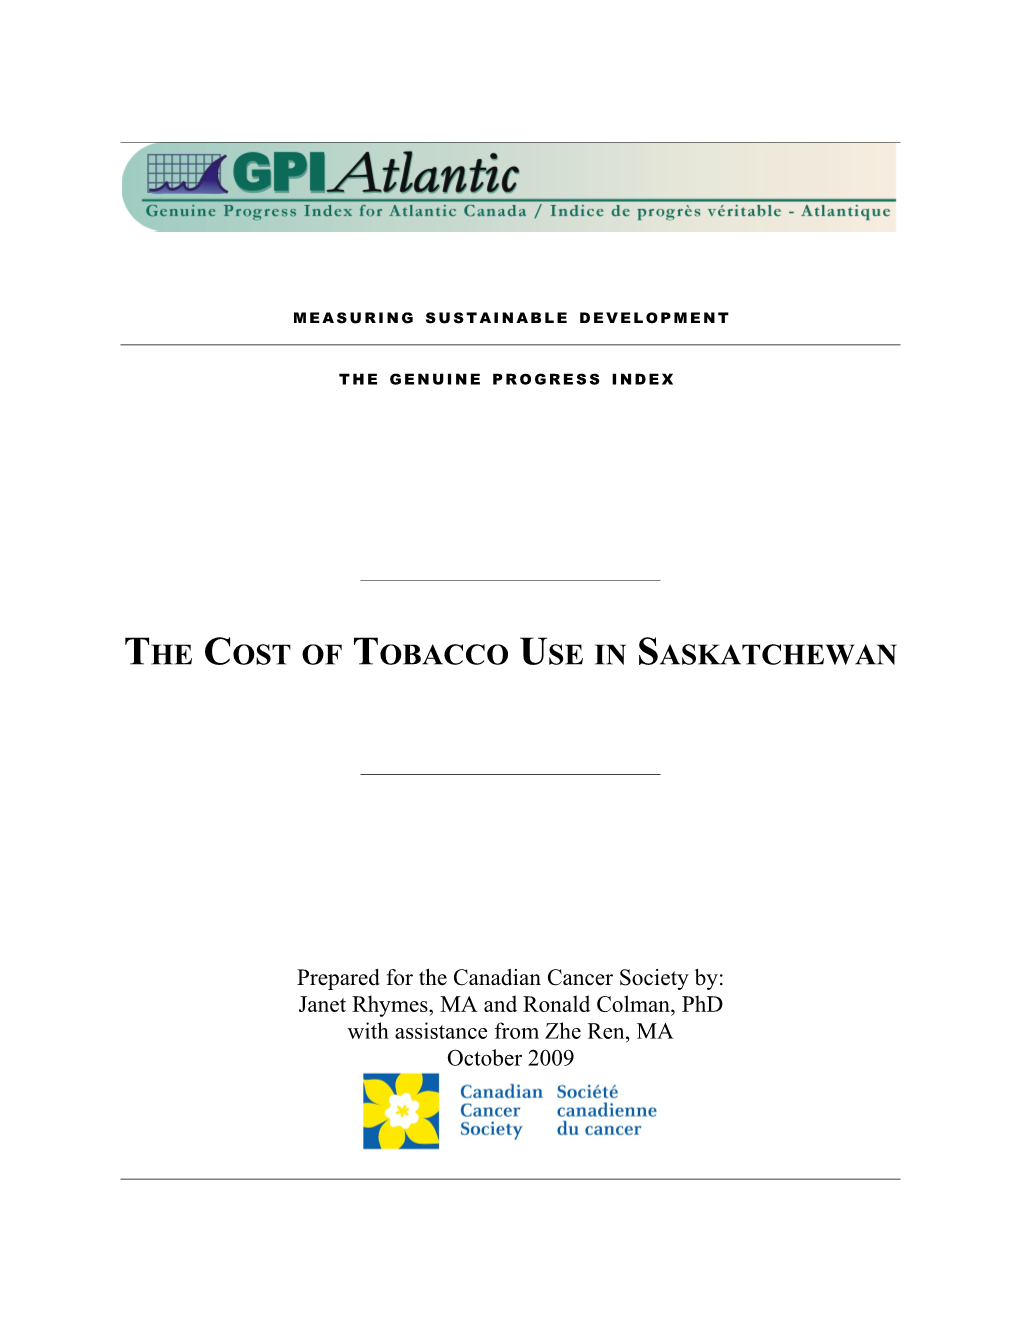 The Cost of Tobacco Use in Saskatchewan